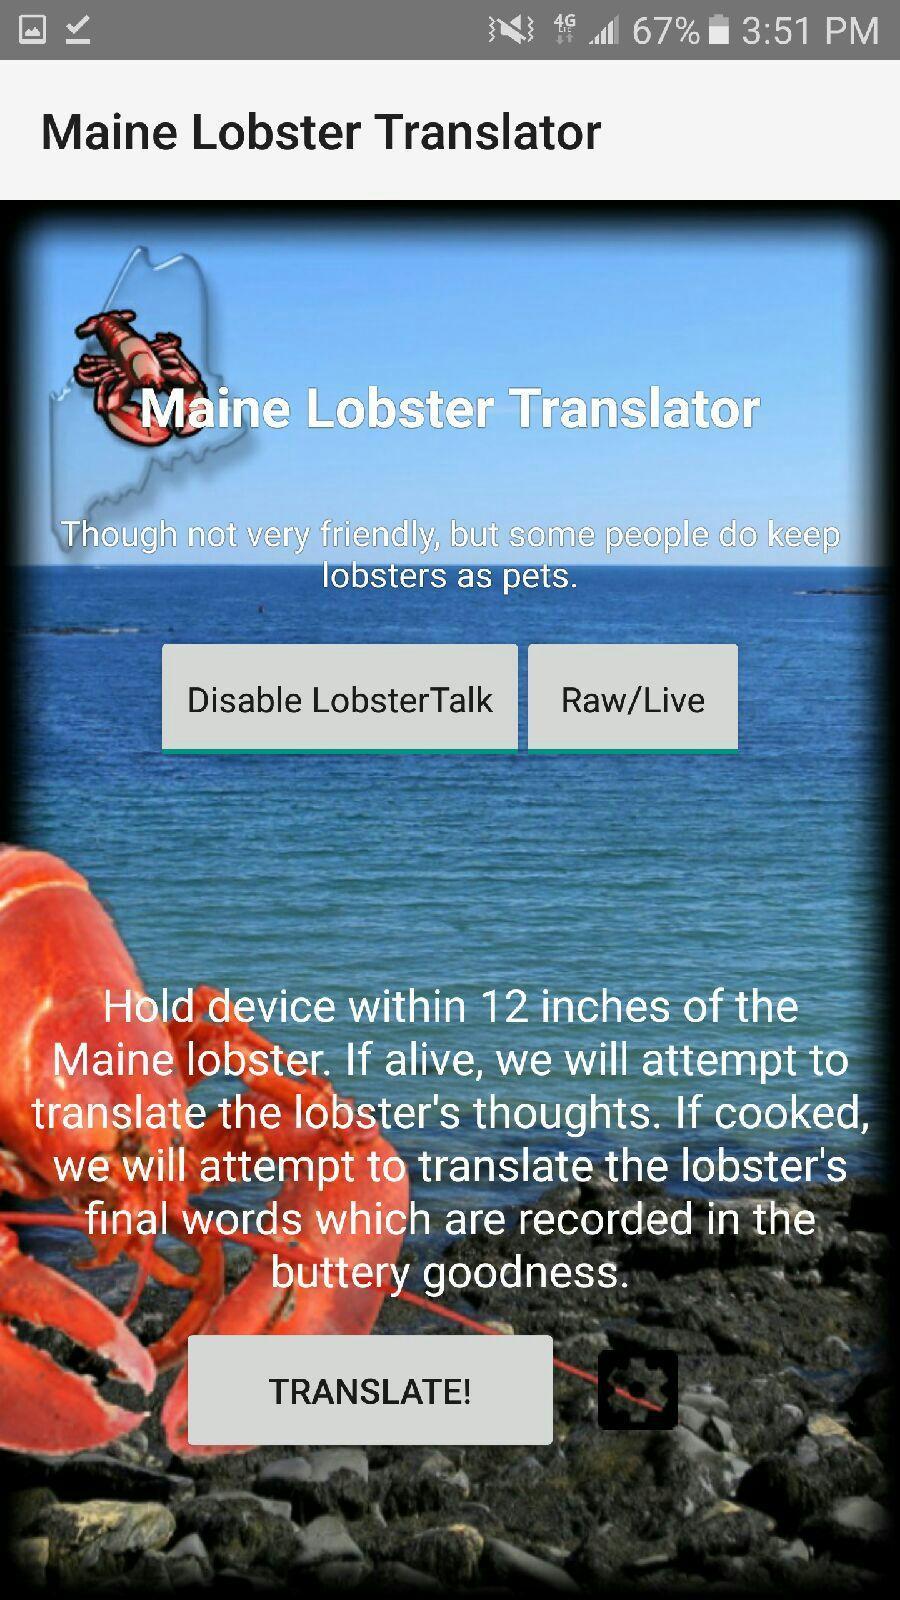 The Maine Lobster Translator for Android - APK Download